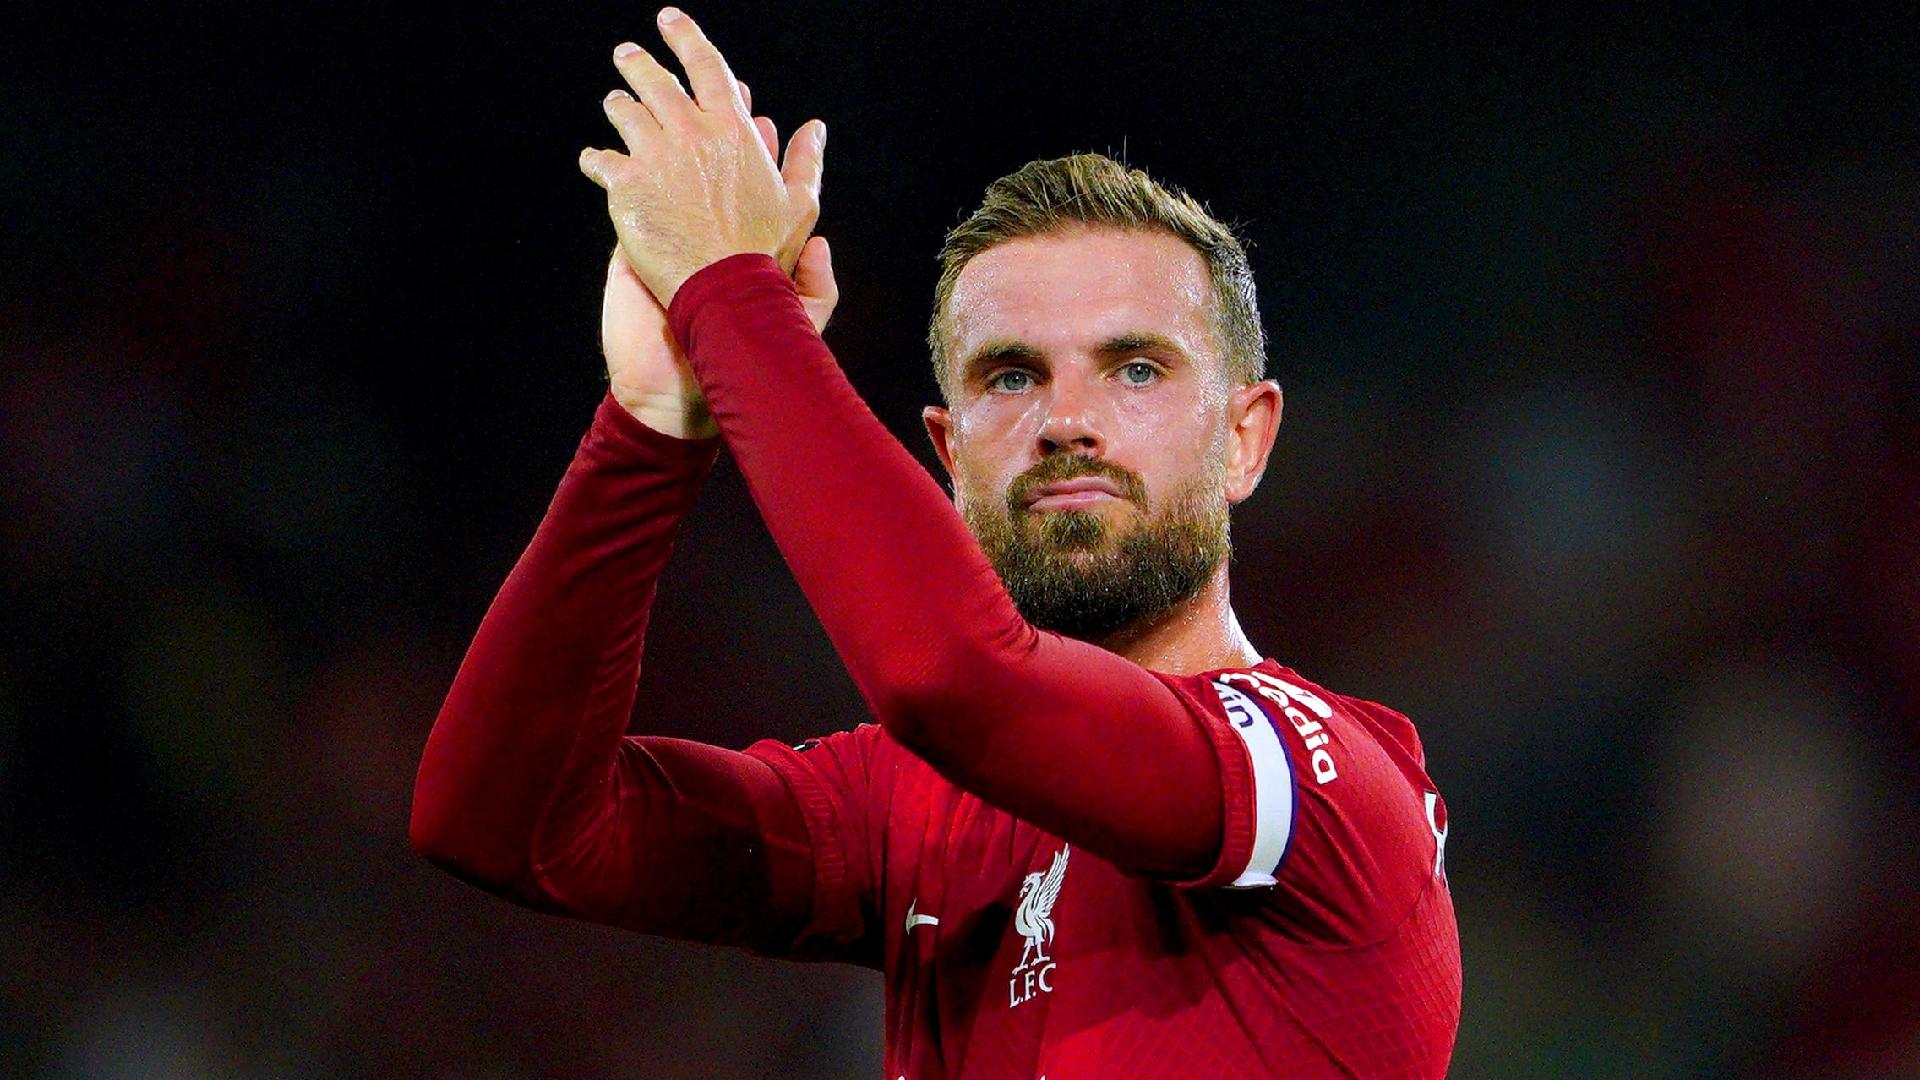 I watched Jordan Henderson in the Saudi Pro League so you don't have to